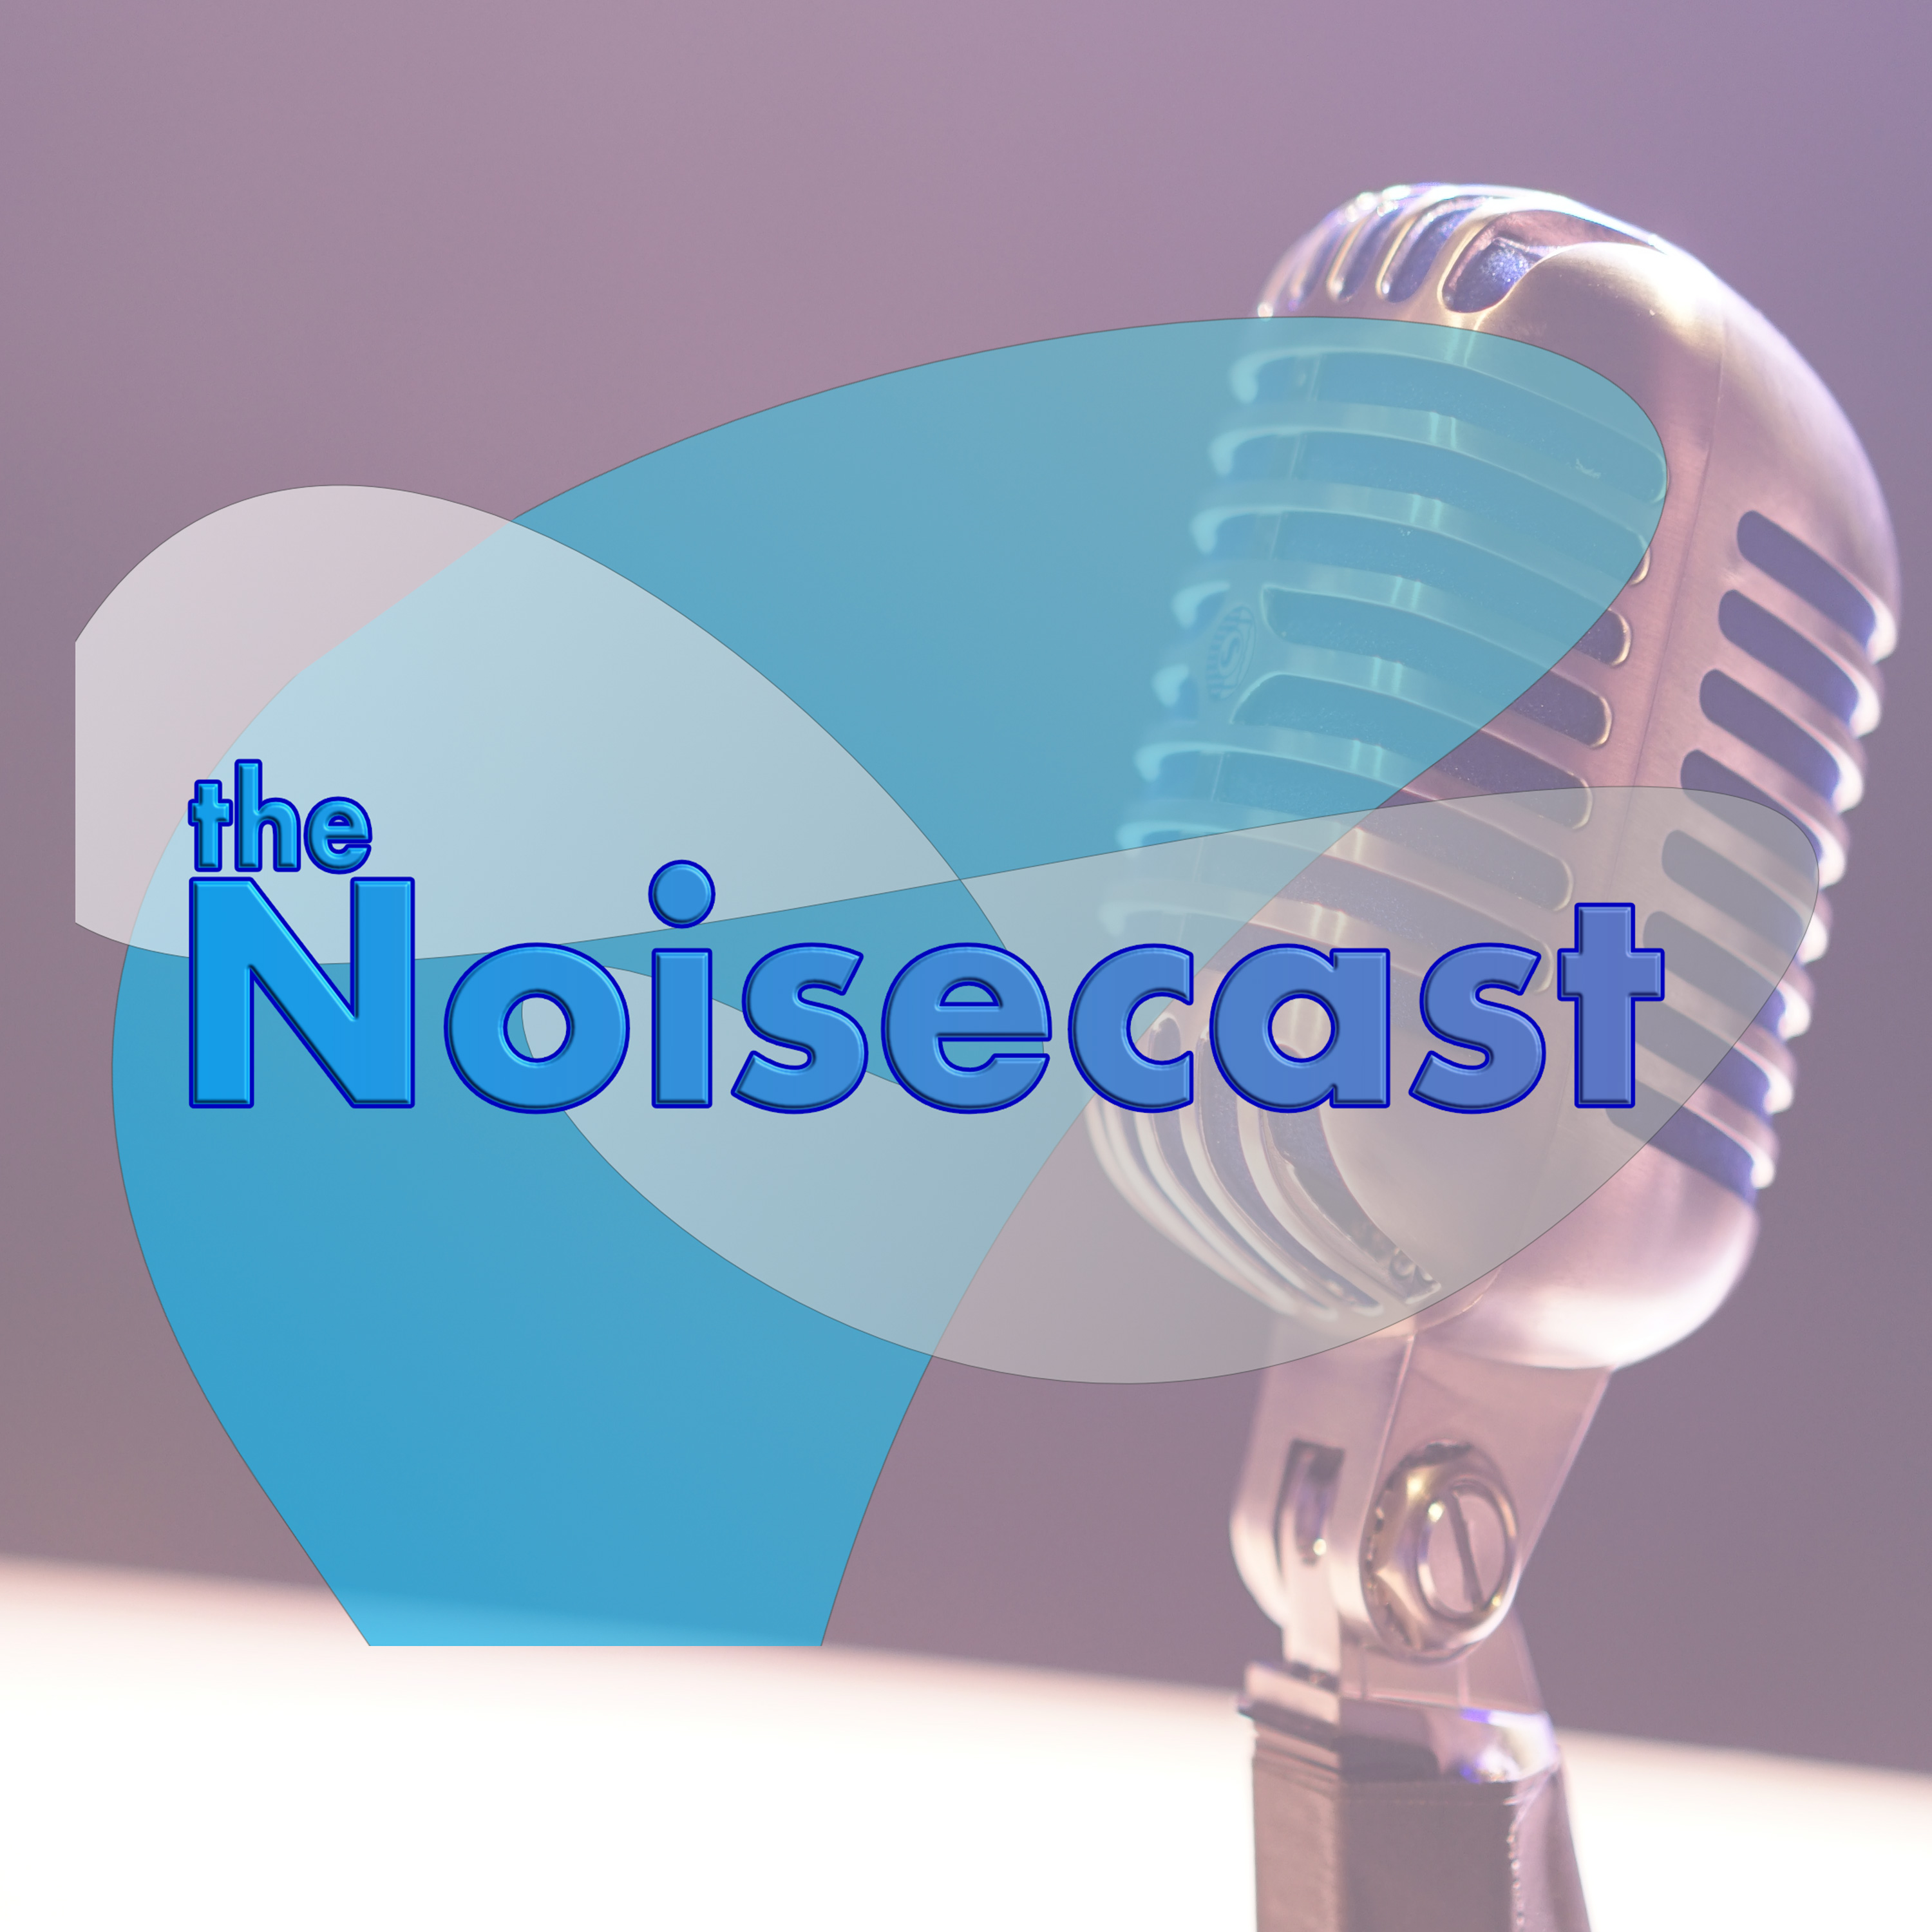 The Noisecast Episode 6 (2018) - Street Photography with Mason Resnick